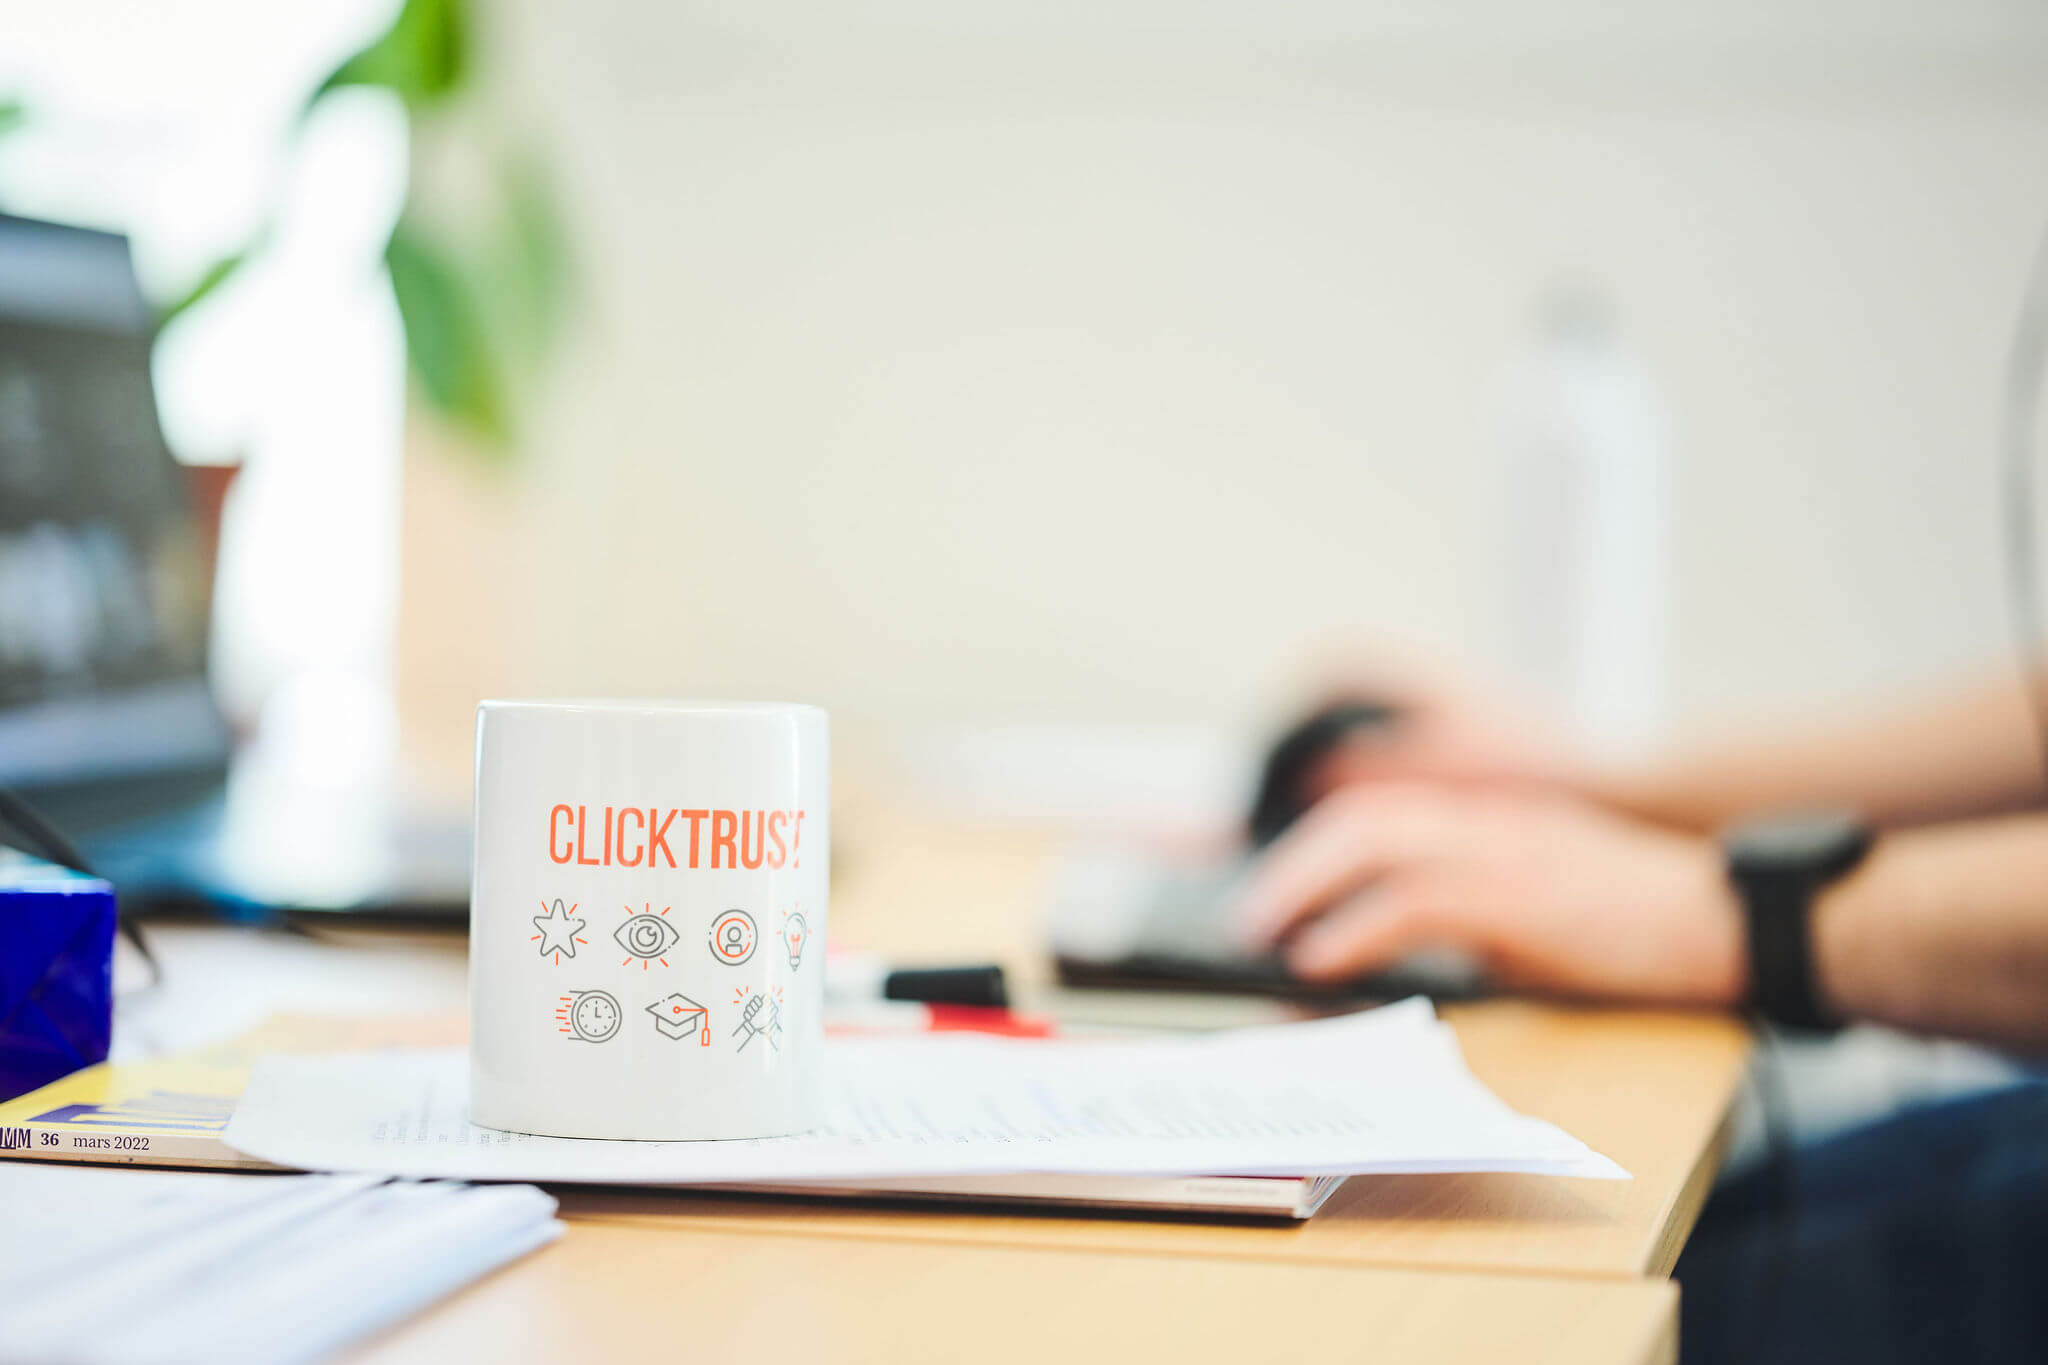 The CLICKTRUST monthly pick – April 2022